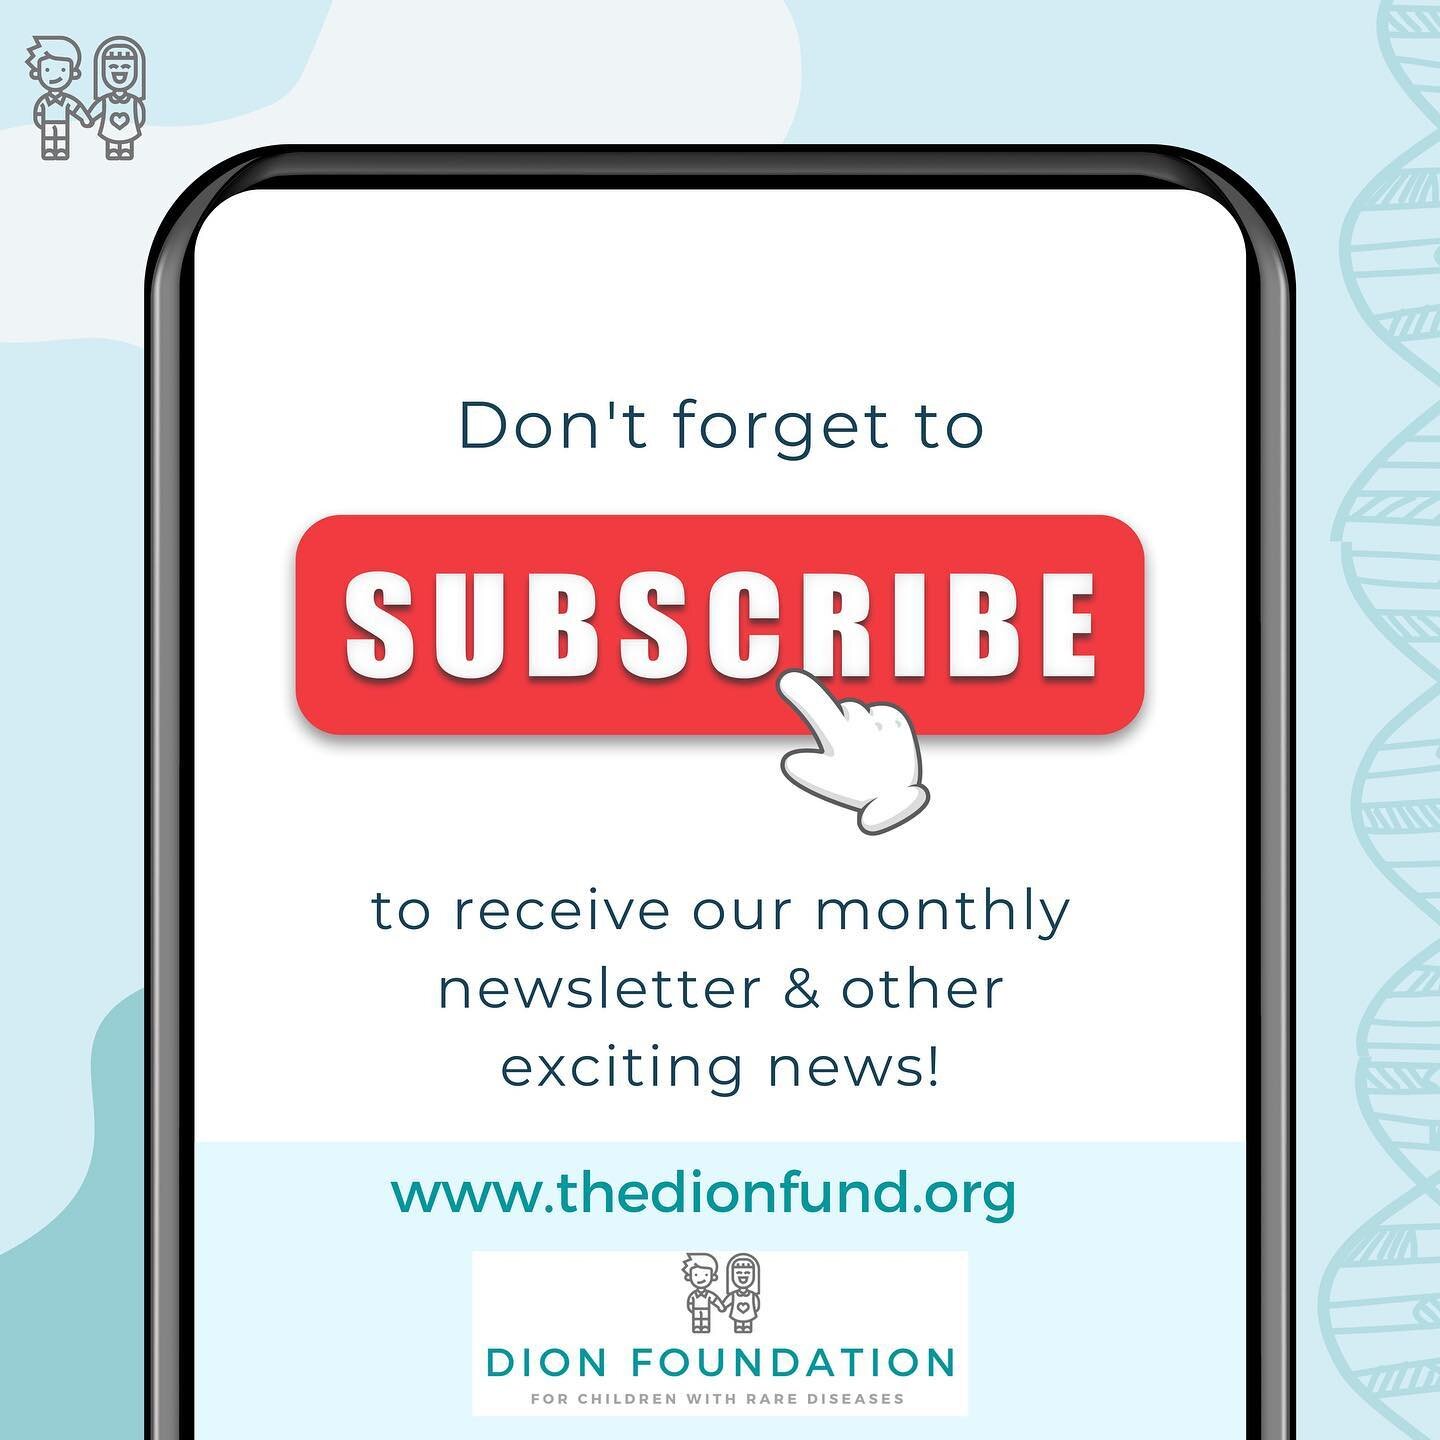 Don&rsquo;t forget to subscribe on our website to receive our monthly newsletter! In the coming weeks we are finalizing two exciting events. 

Details to come. Visit our site to subscribe so you don&rsquo;t miss them 📬

We hope everyone has a great 